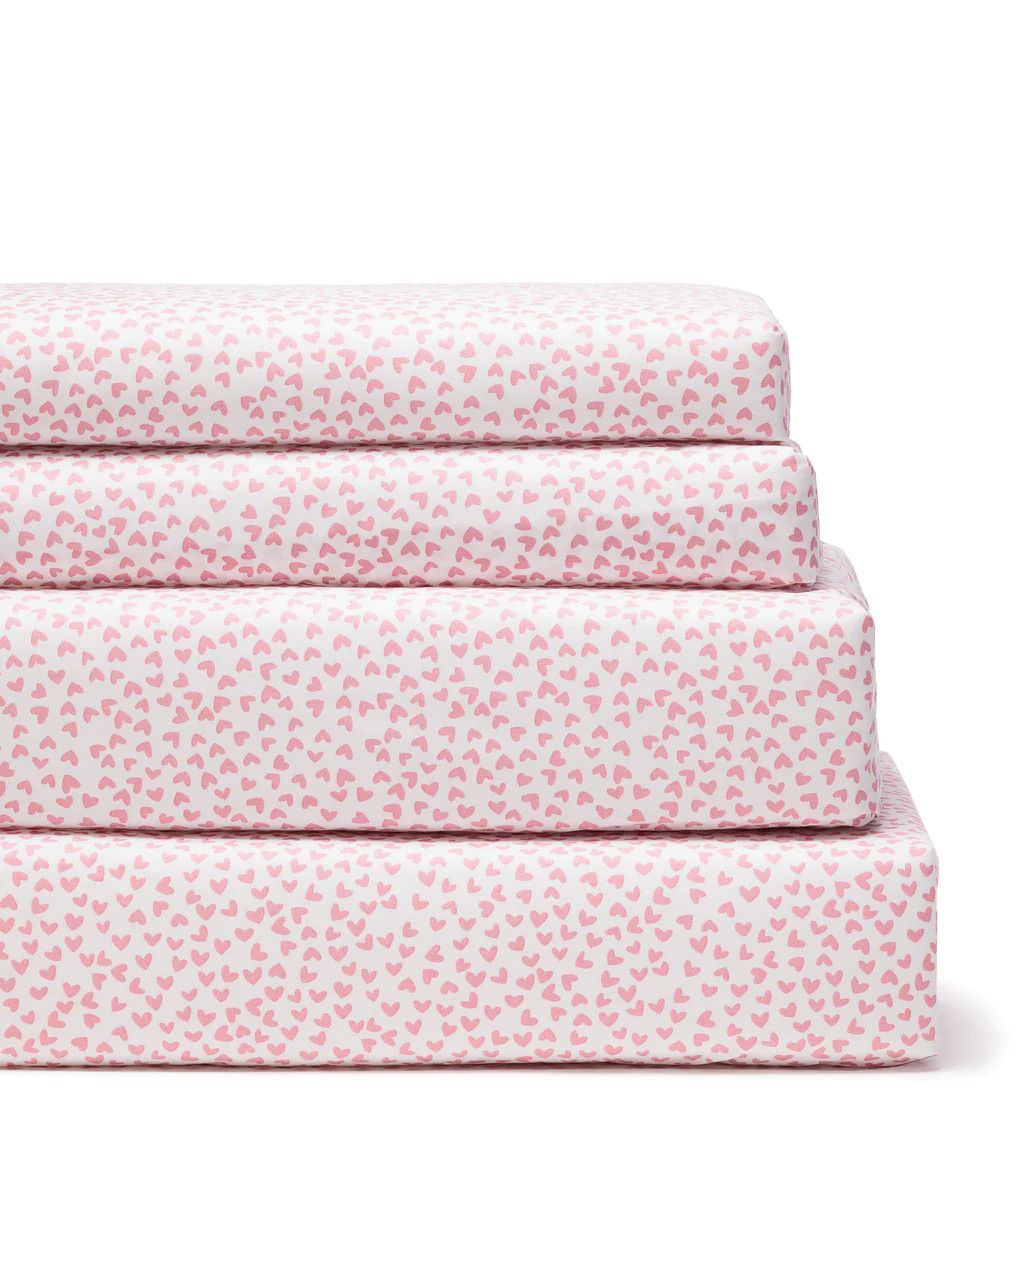 Luxe Premium 100% Cotton Sweethearts Bed Sheets | Petite Plume